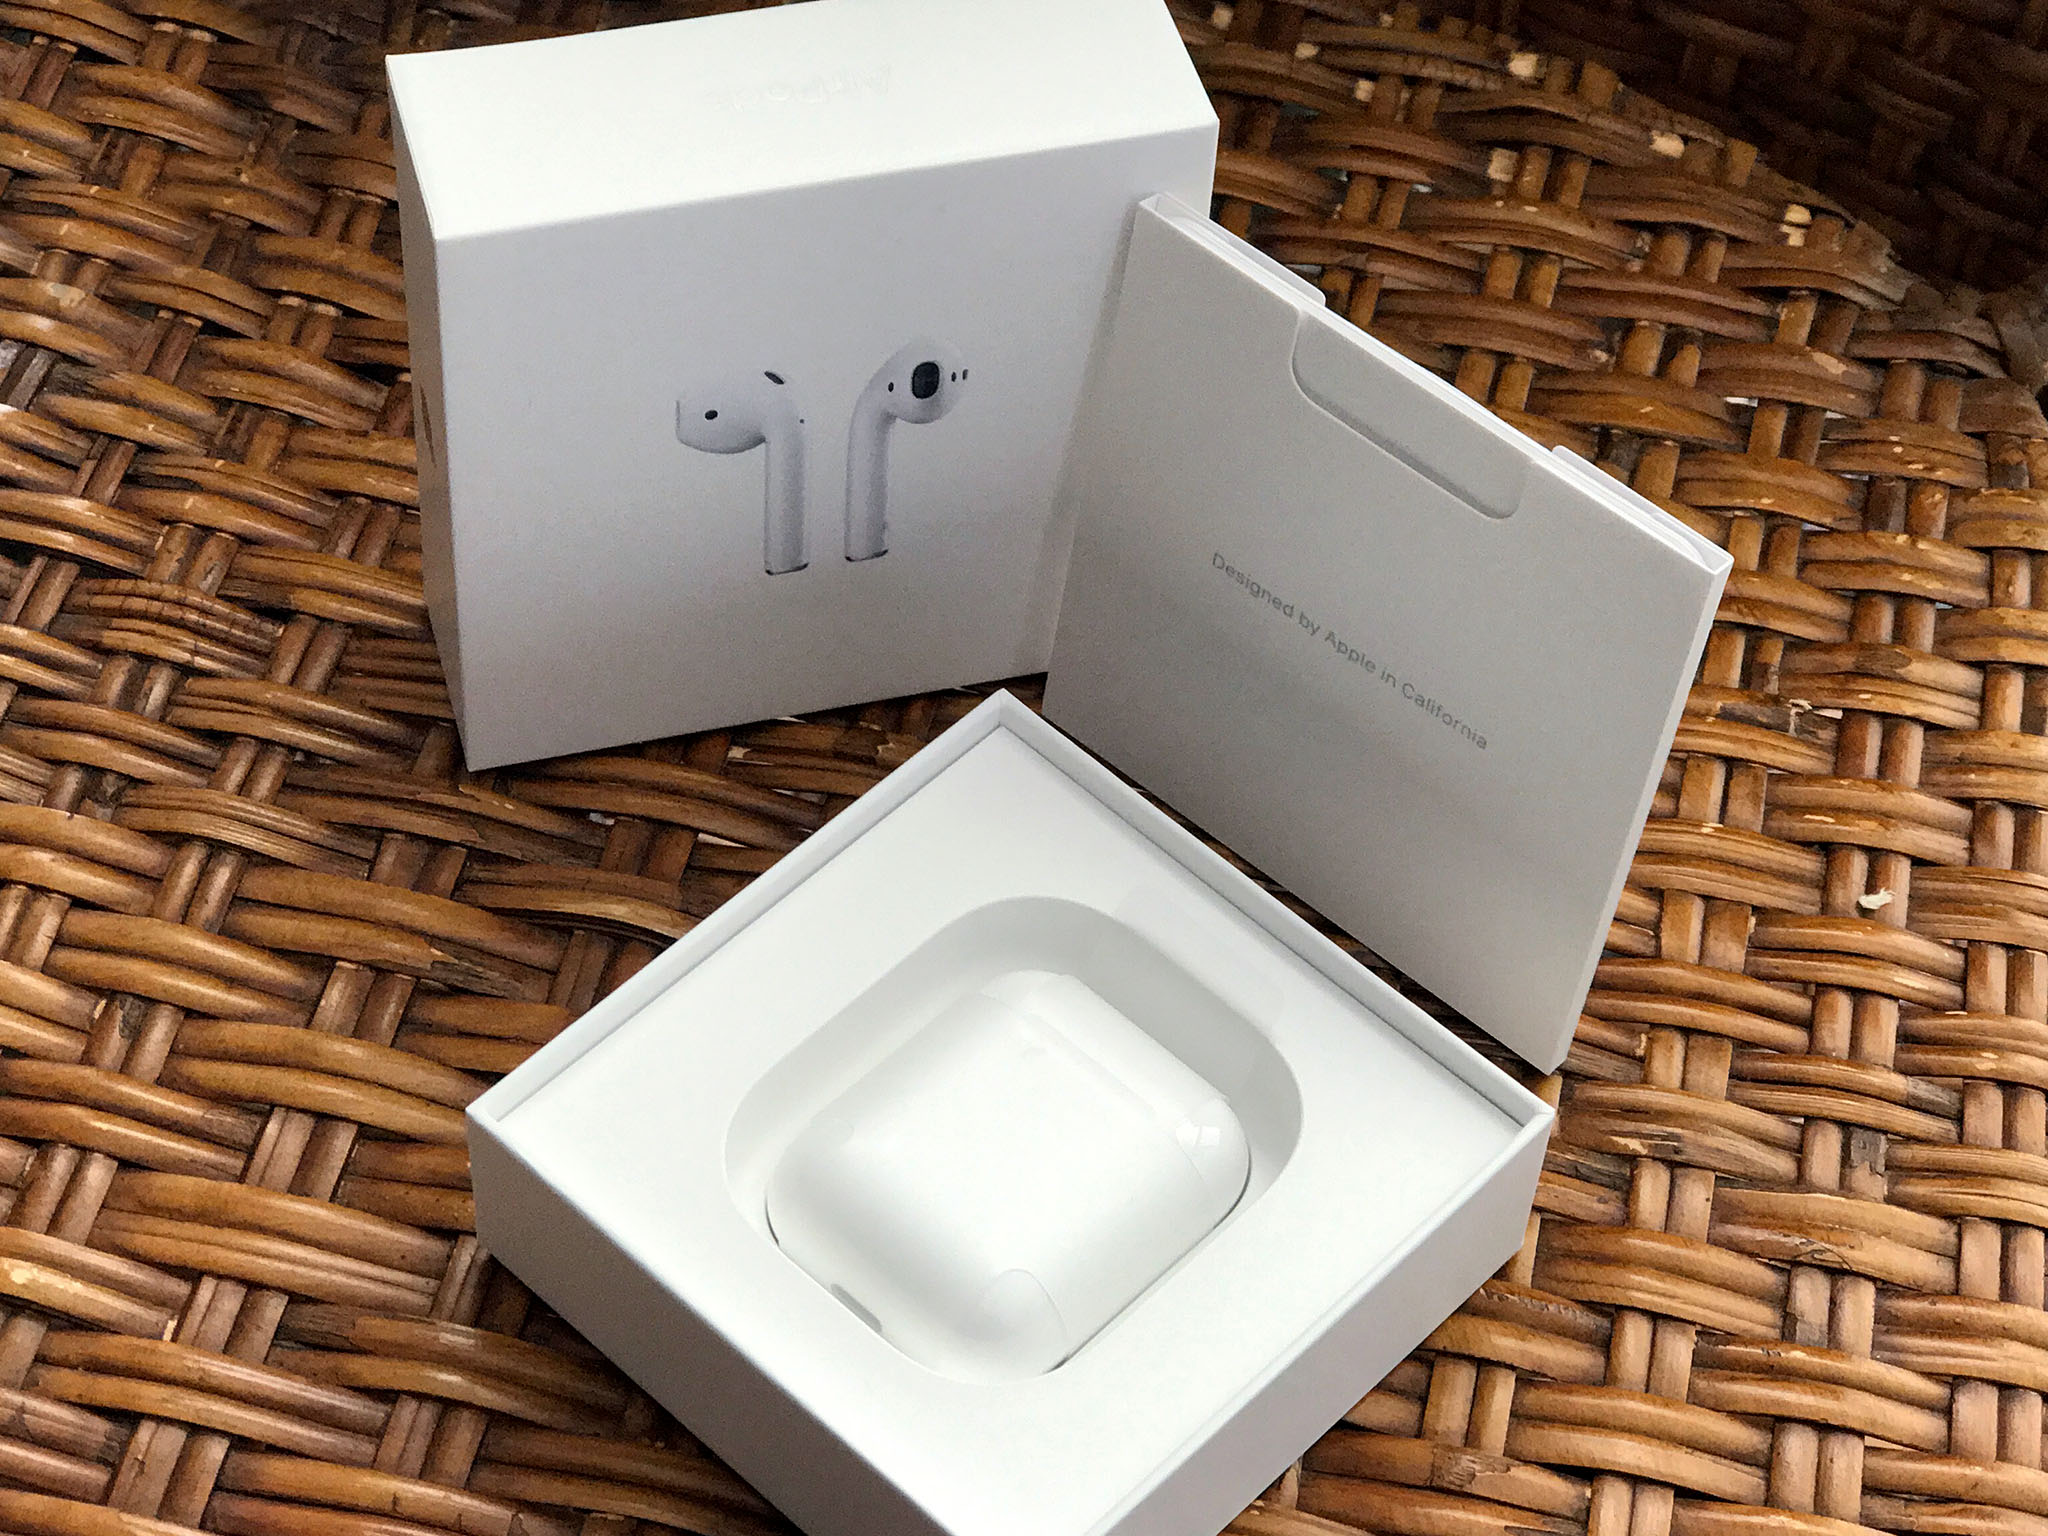 Best way to buy a set of AirPods — and quickly